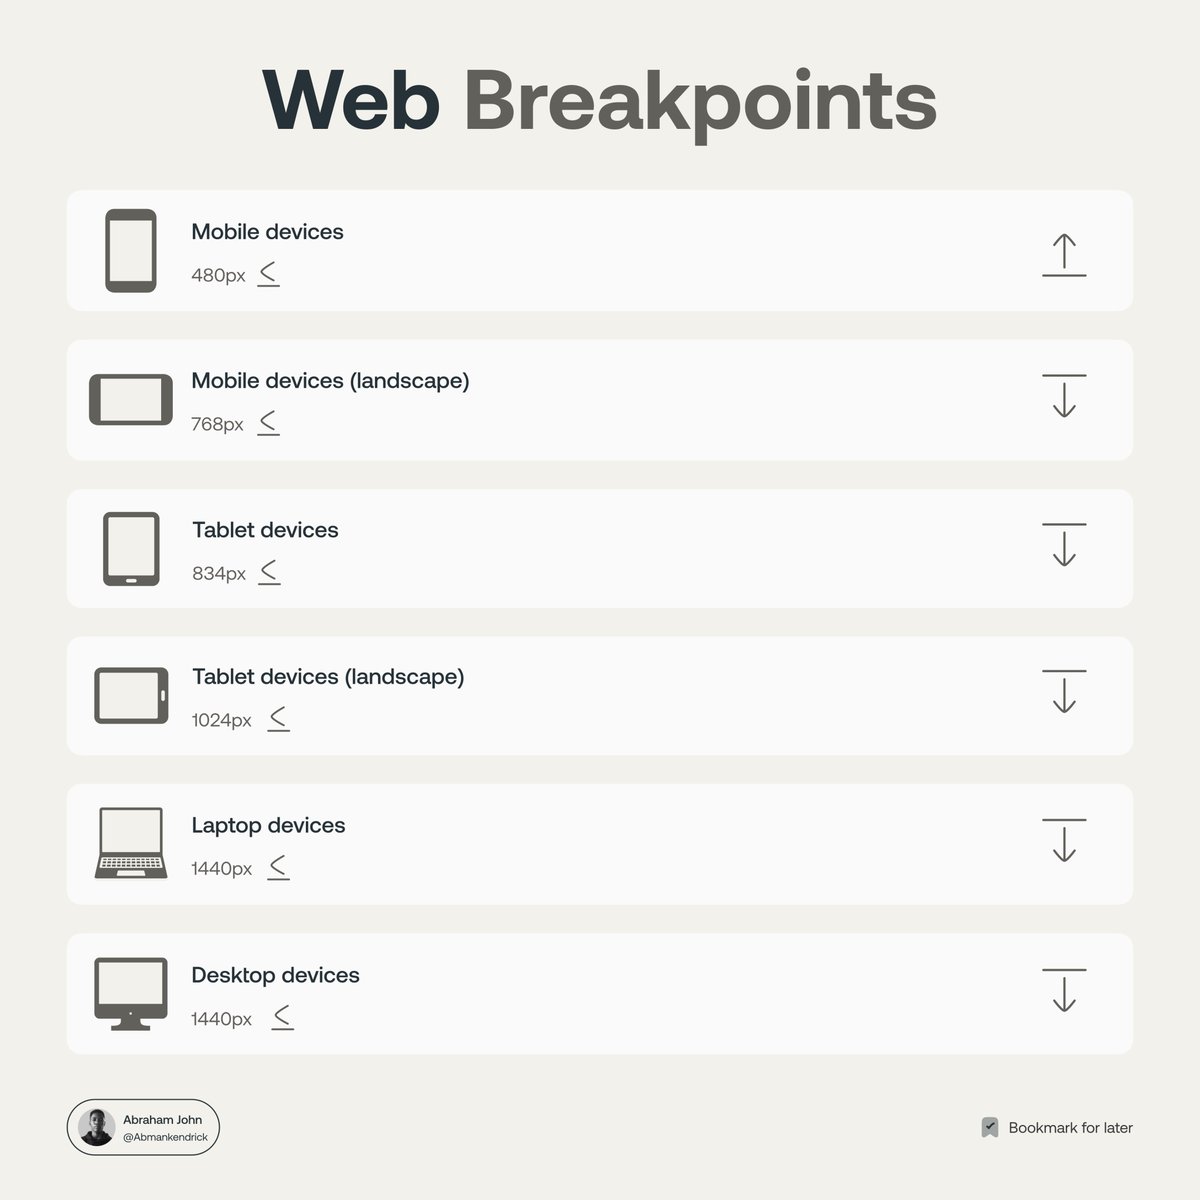 UI/UX Designers and Developers, here are web breakpoints cheat sheets for all devices which can help in your website's layout for your next UI design project.

Bookmark it for later 💜